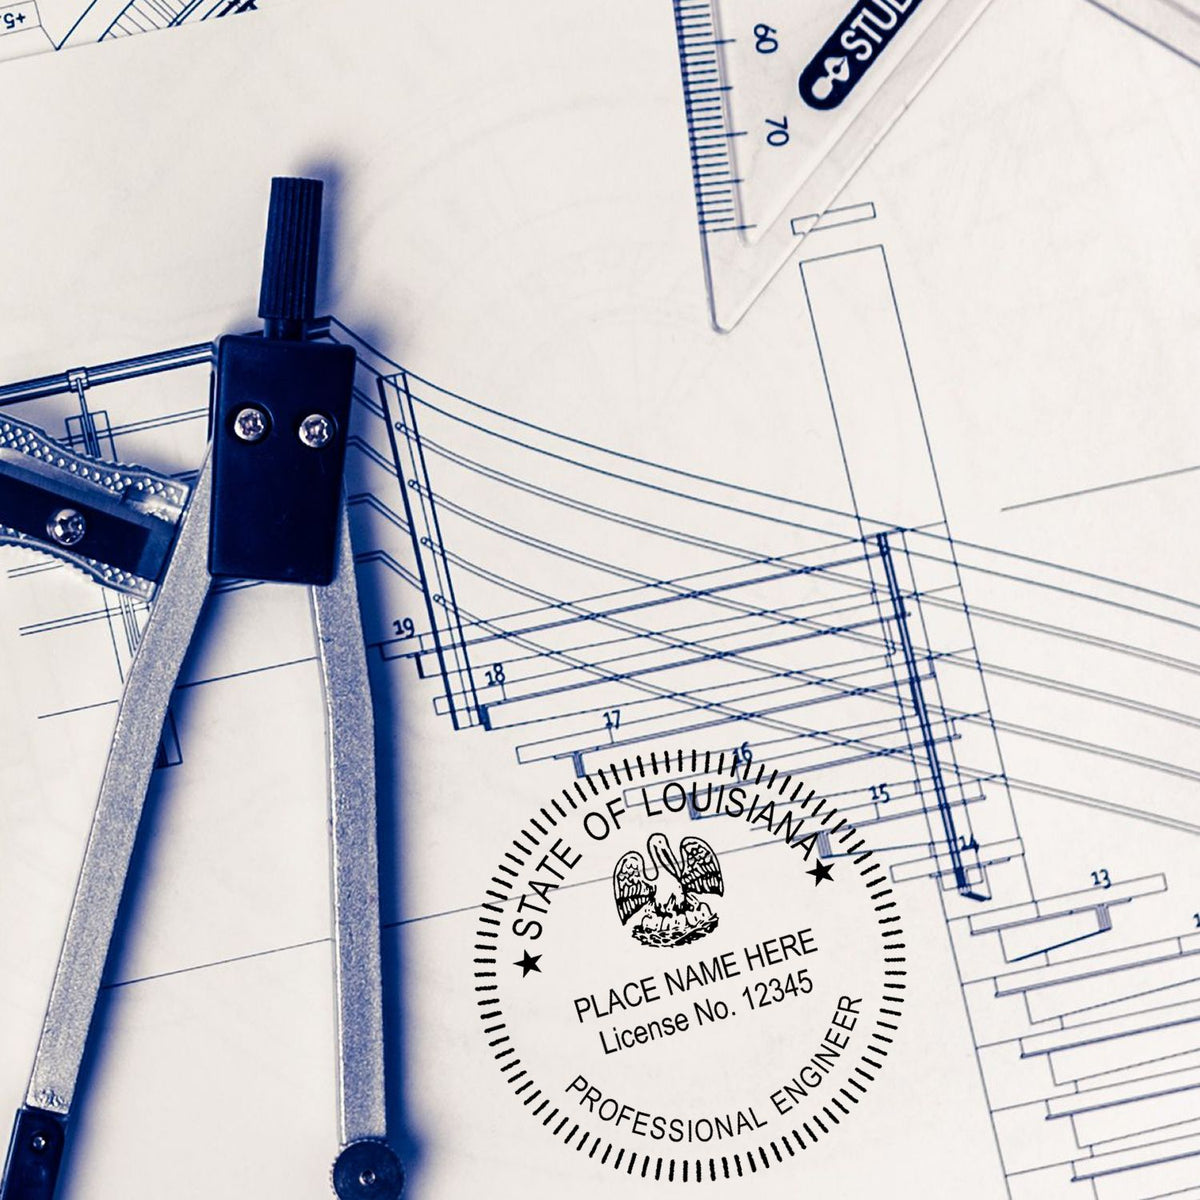 This paper is stamped with a sample imprint of the Digital Louisiana PE Stamp and Electronic Seal for Louisiana Engineer, signifying its quality and reliability.